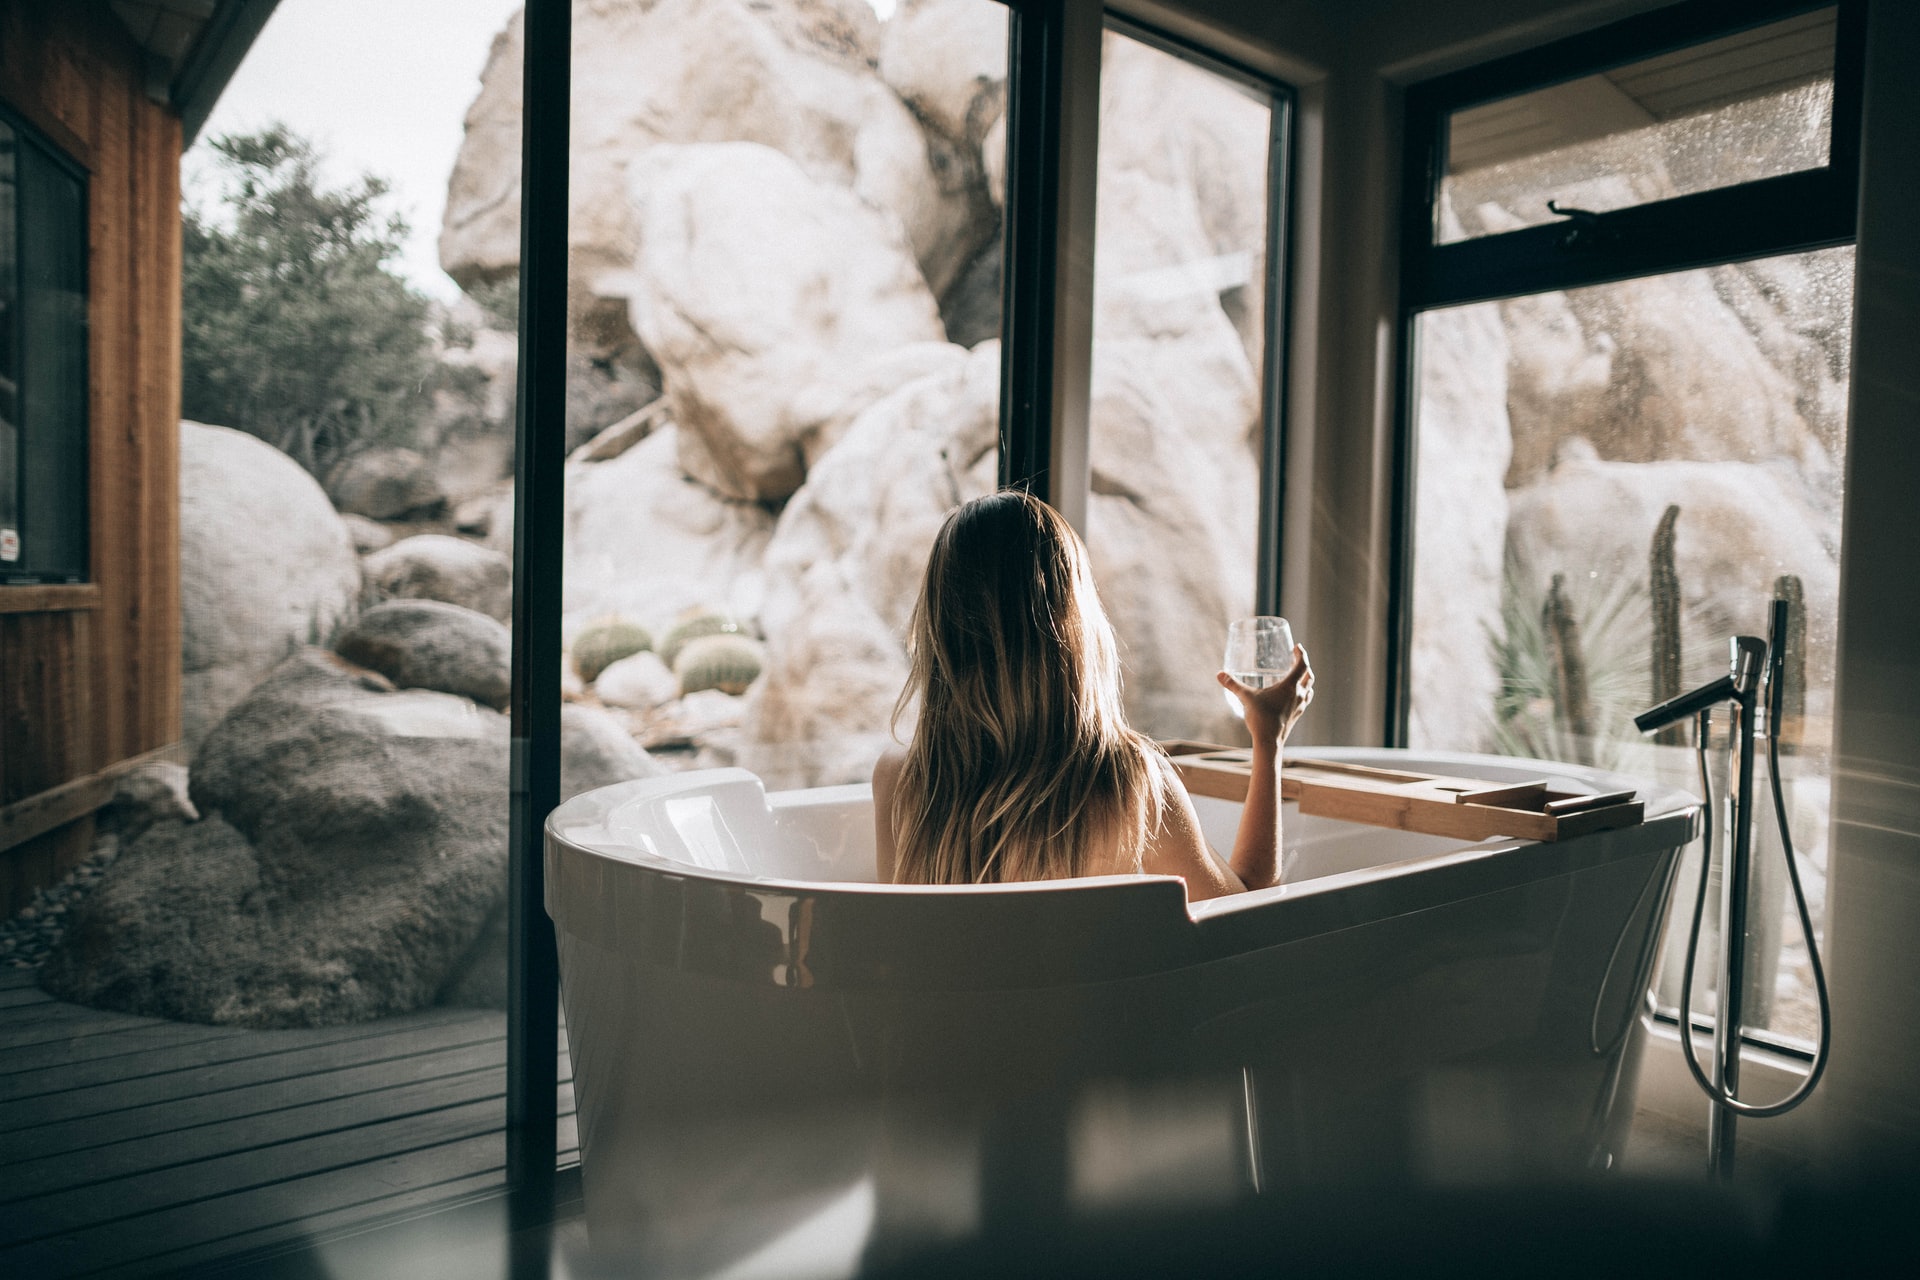 7 ways to have the best staycation ever - bring the spa to your home - woman sitting in bathtub holding a glass of wine looking out a natural rock formation